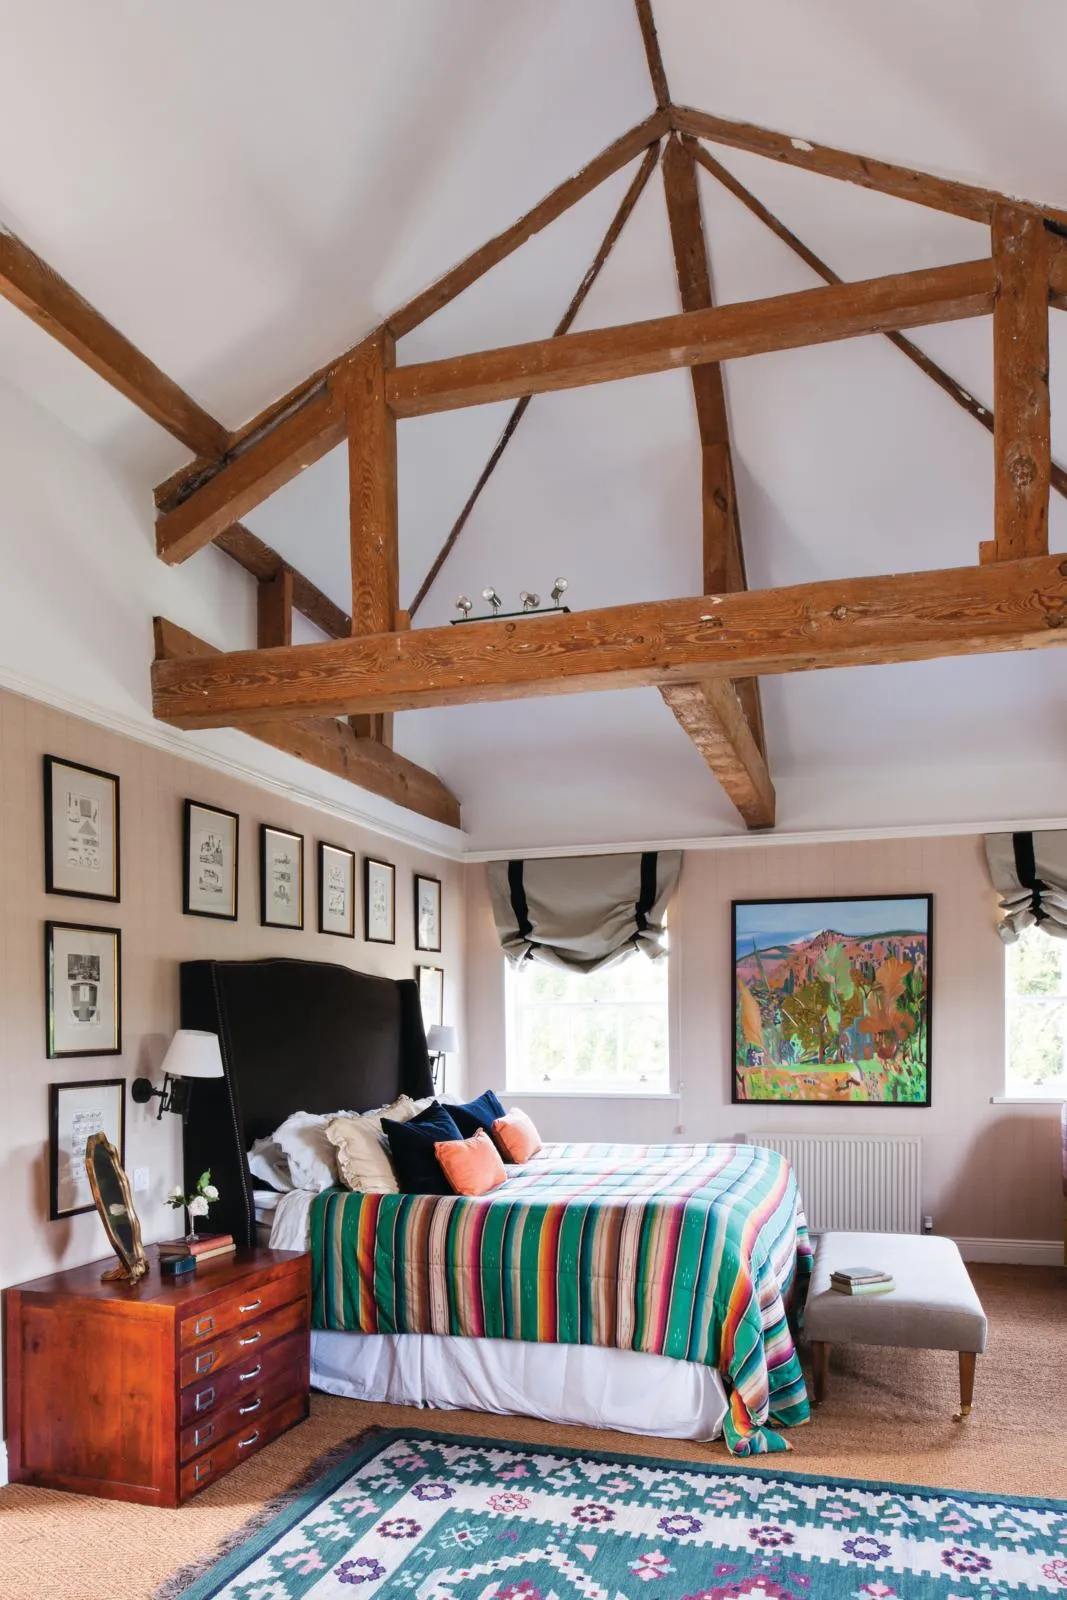 A converted 18th-century stable block in Dorset